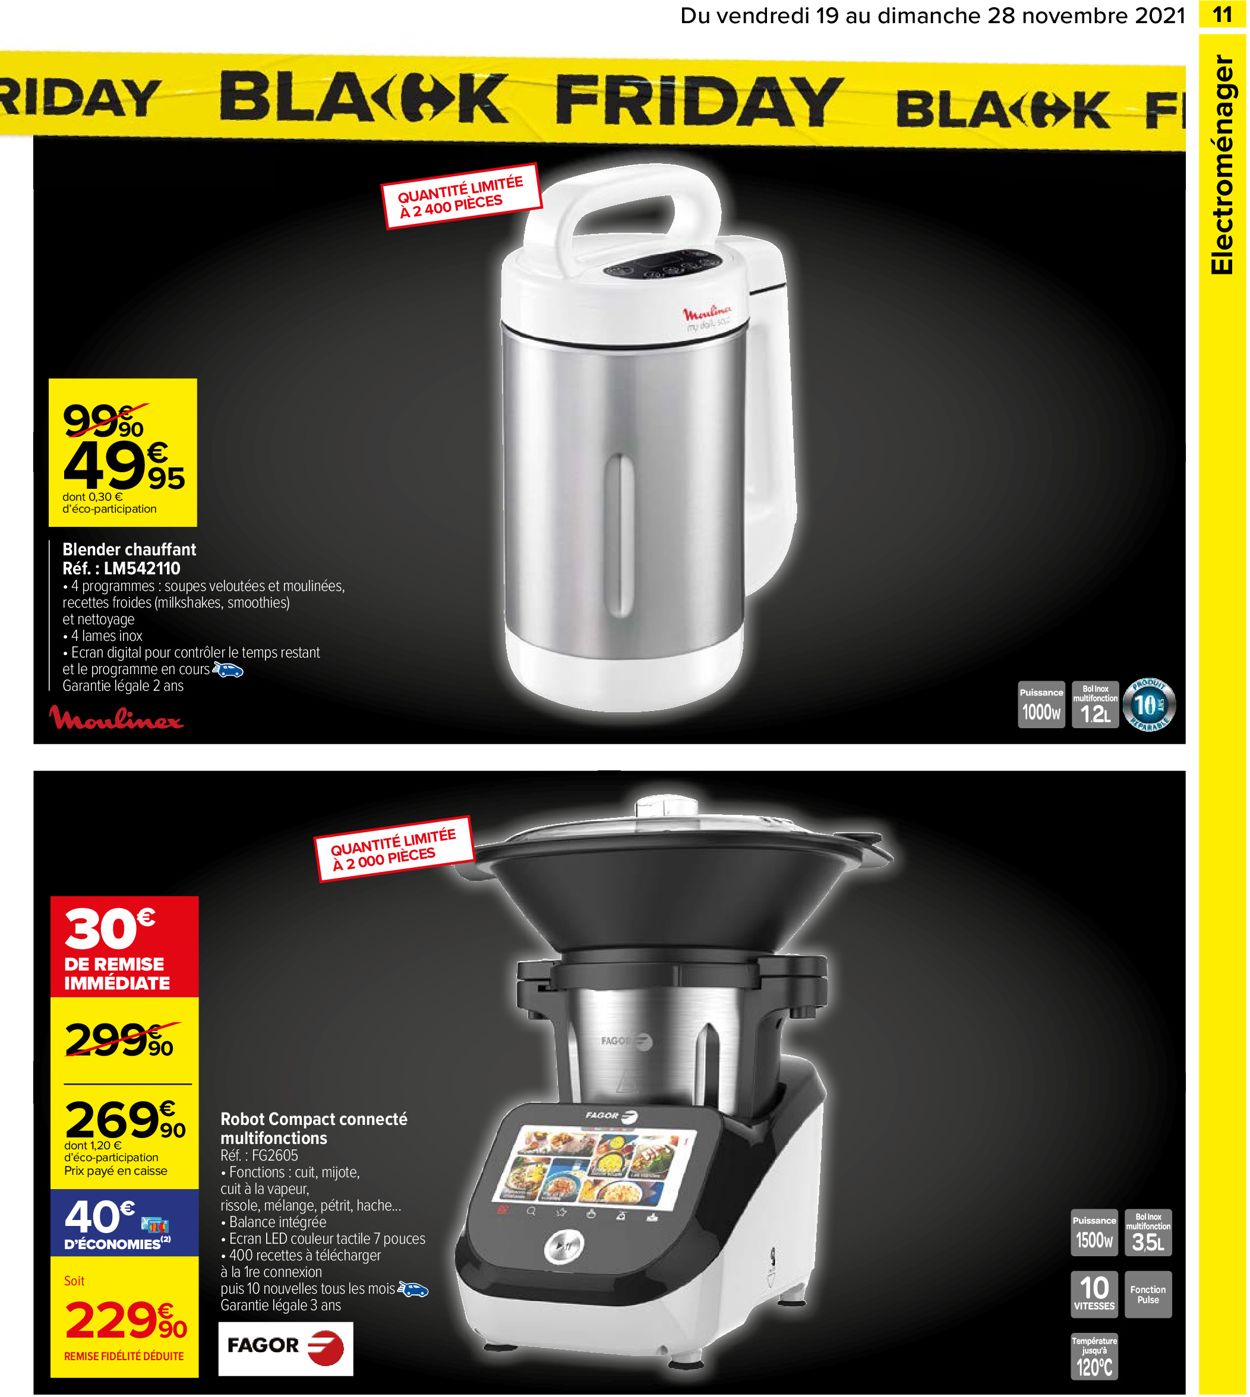 Carrefour BLACK WEEK 2021 Catalogue - 19.11-28.11.2021 (Page 11)